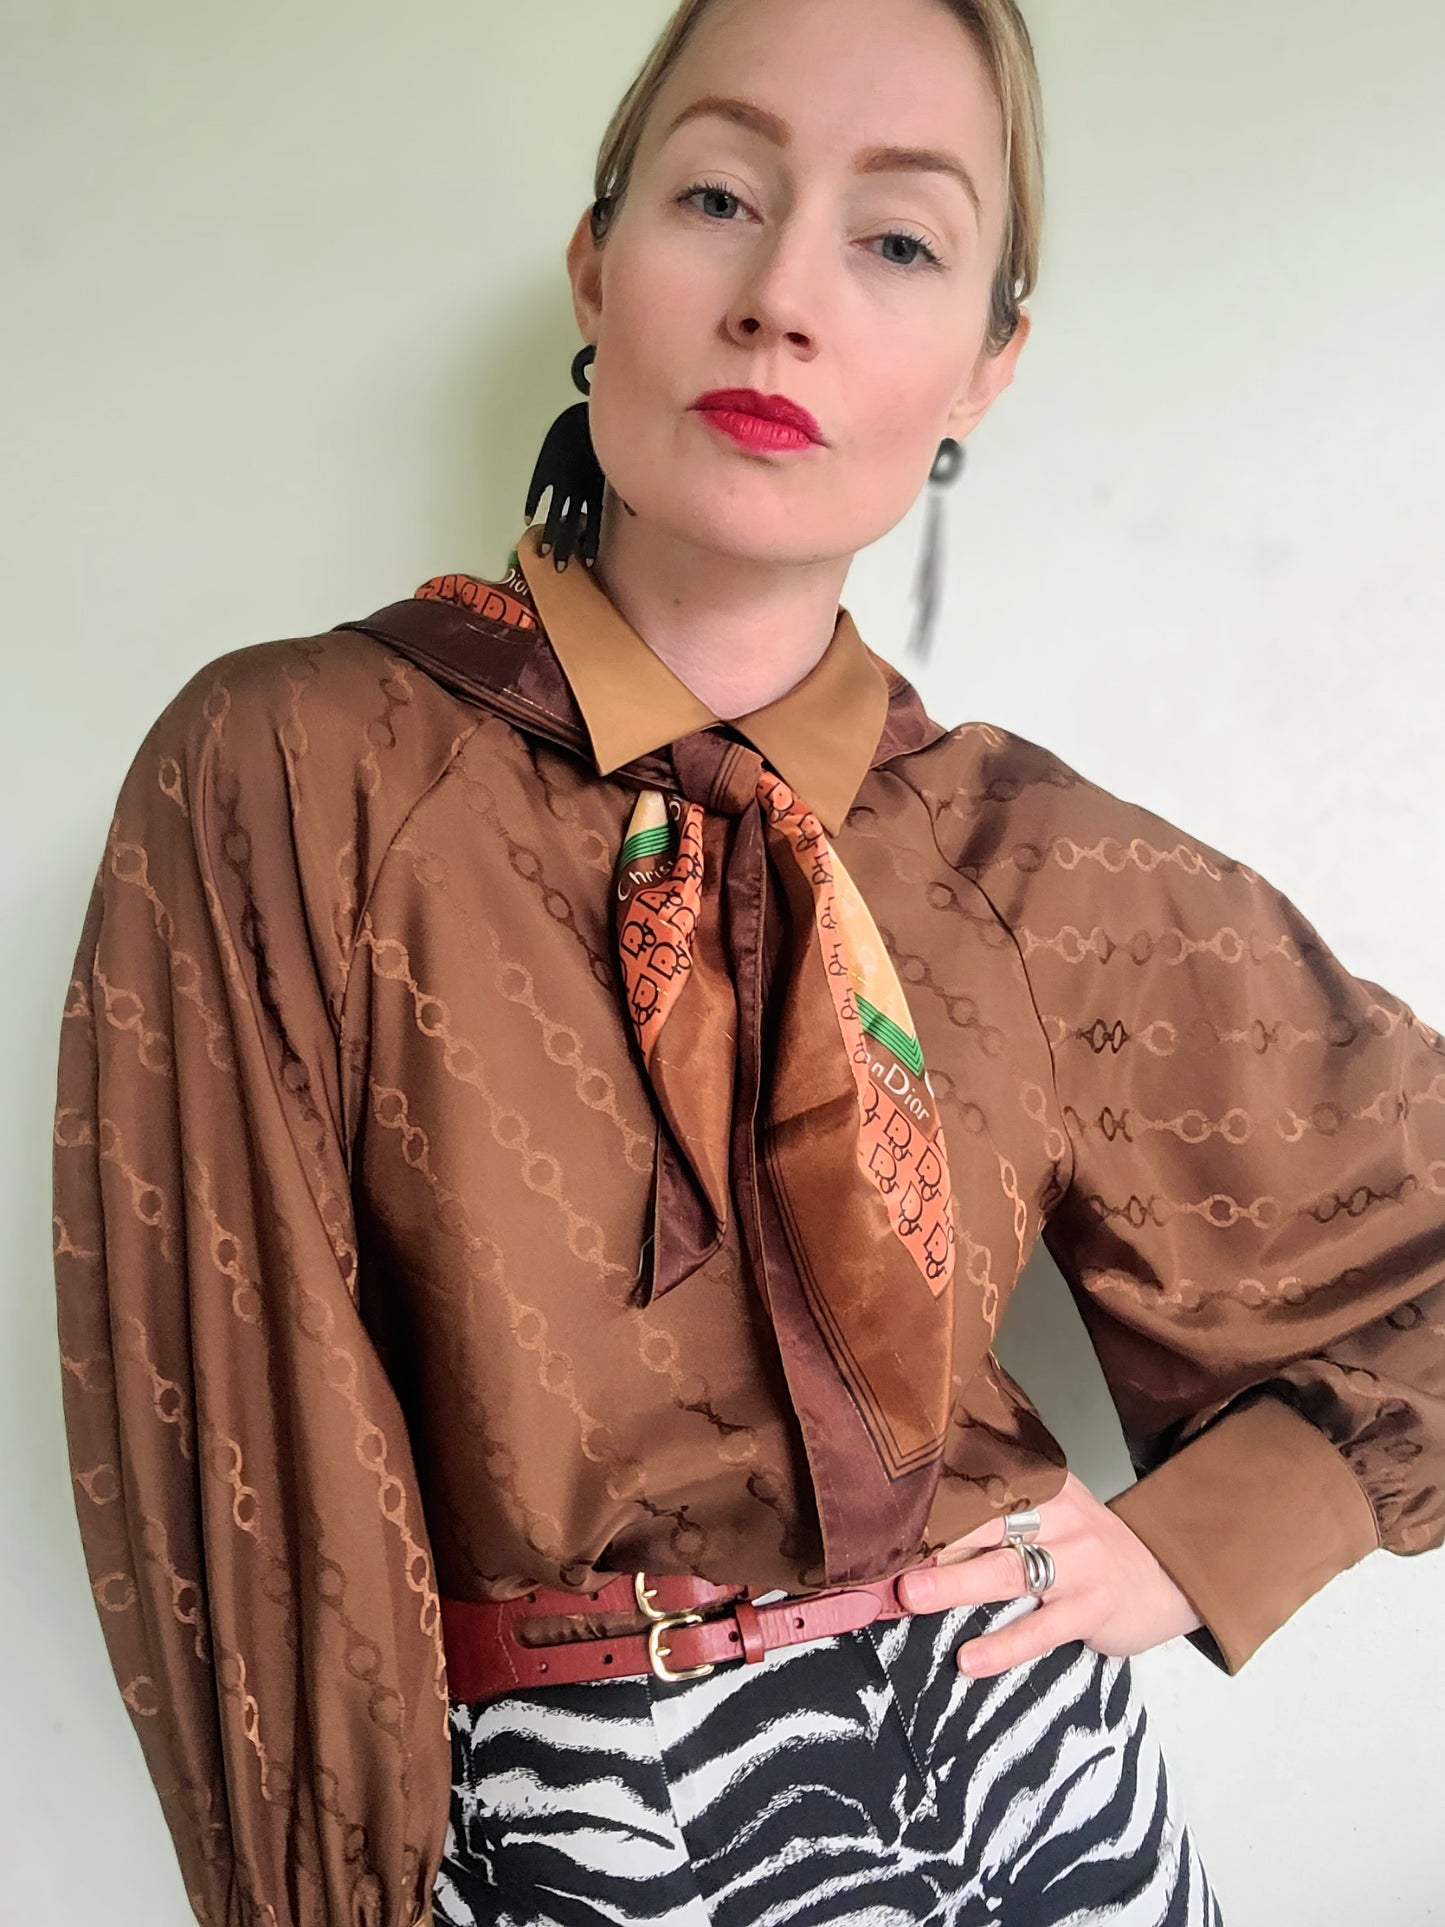 The Horsebit Collared Blouse by AMERI Vintage Undressed S PETITE